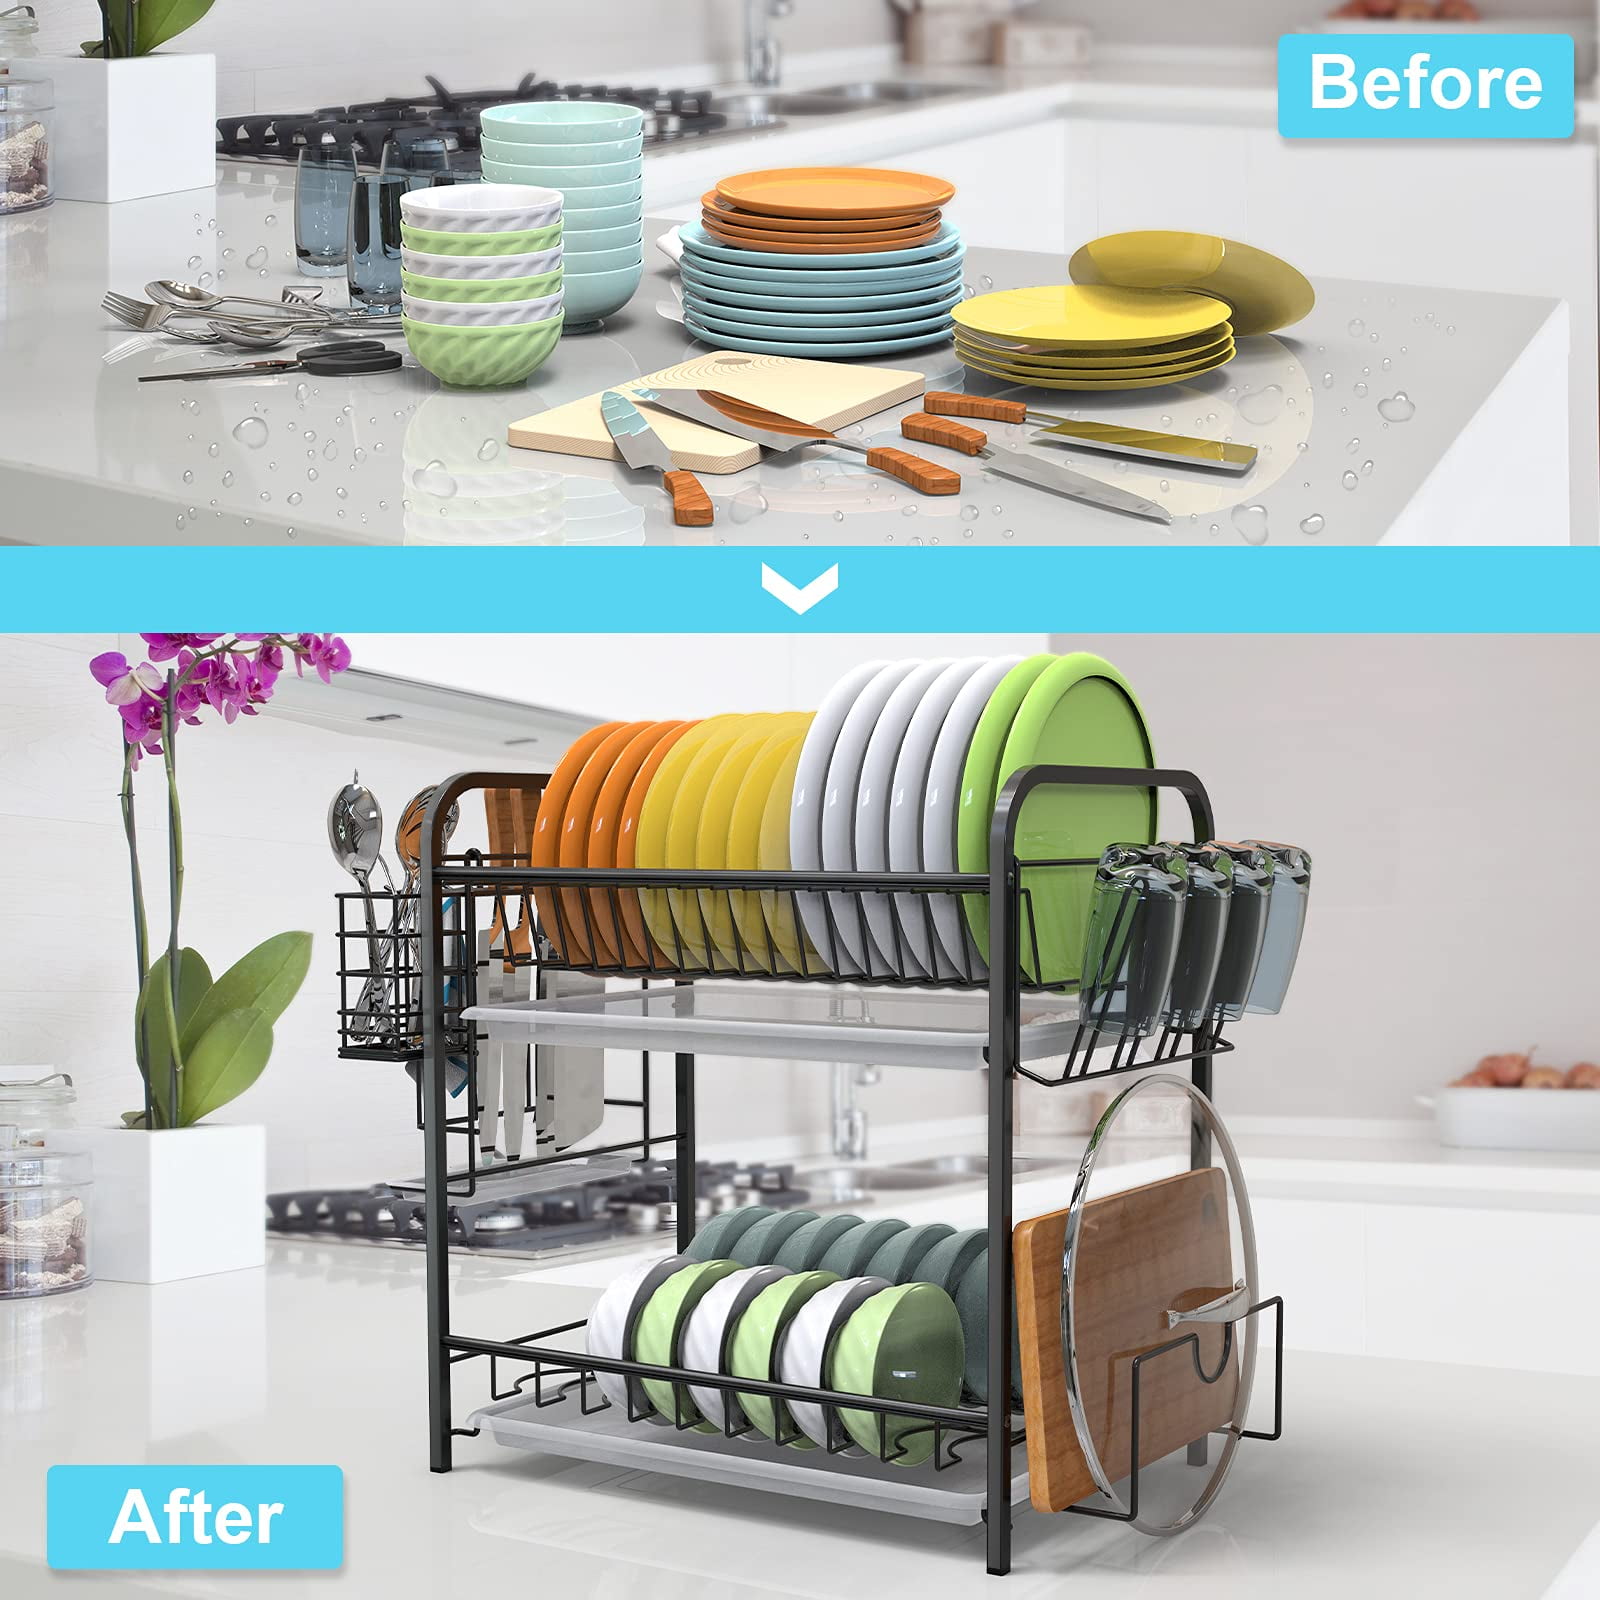  HMGDFUE Large Dish Drying Rack,17 D x 11.9 W x 16.7 H Dish  Racks for Kitchen Counter,2 Tier Detachable Large Dish Drainer Organizer  with Utensil Holder Cutting Boards Holder Drain